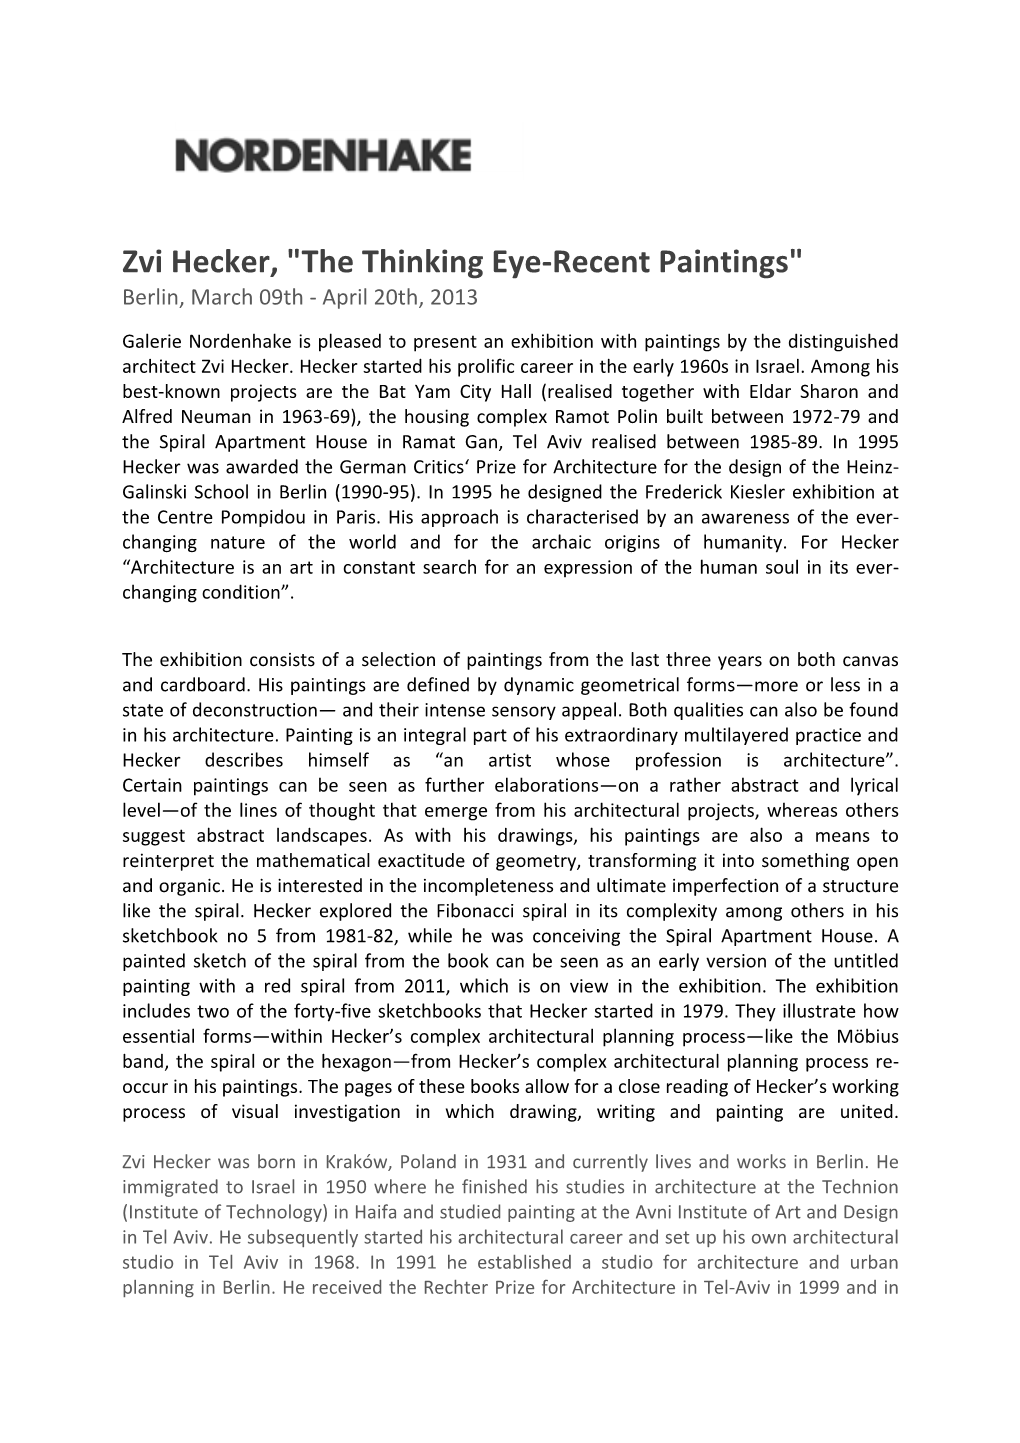 Zvi Hecker, "The Thinking Eye-Recent Paintings" Berlin, March 09Th - April 20Th, 2013